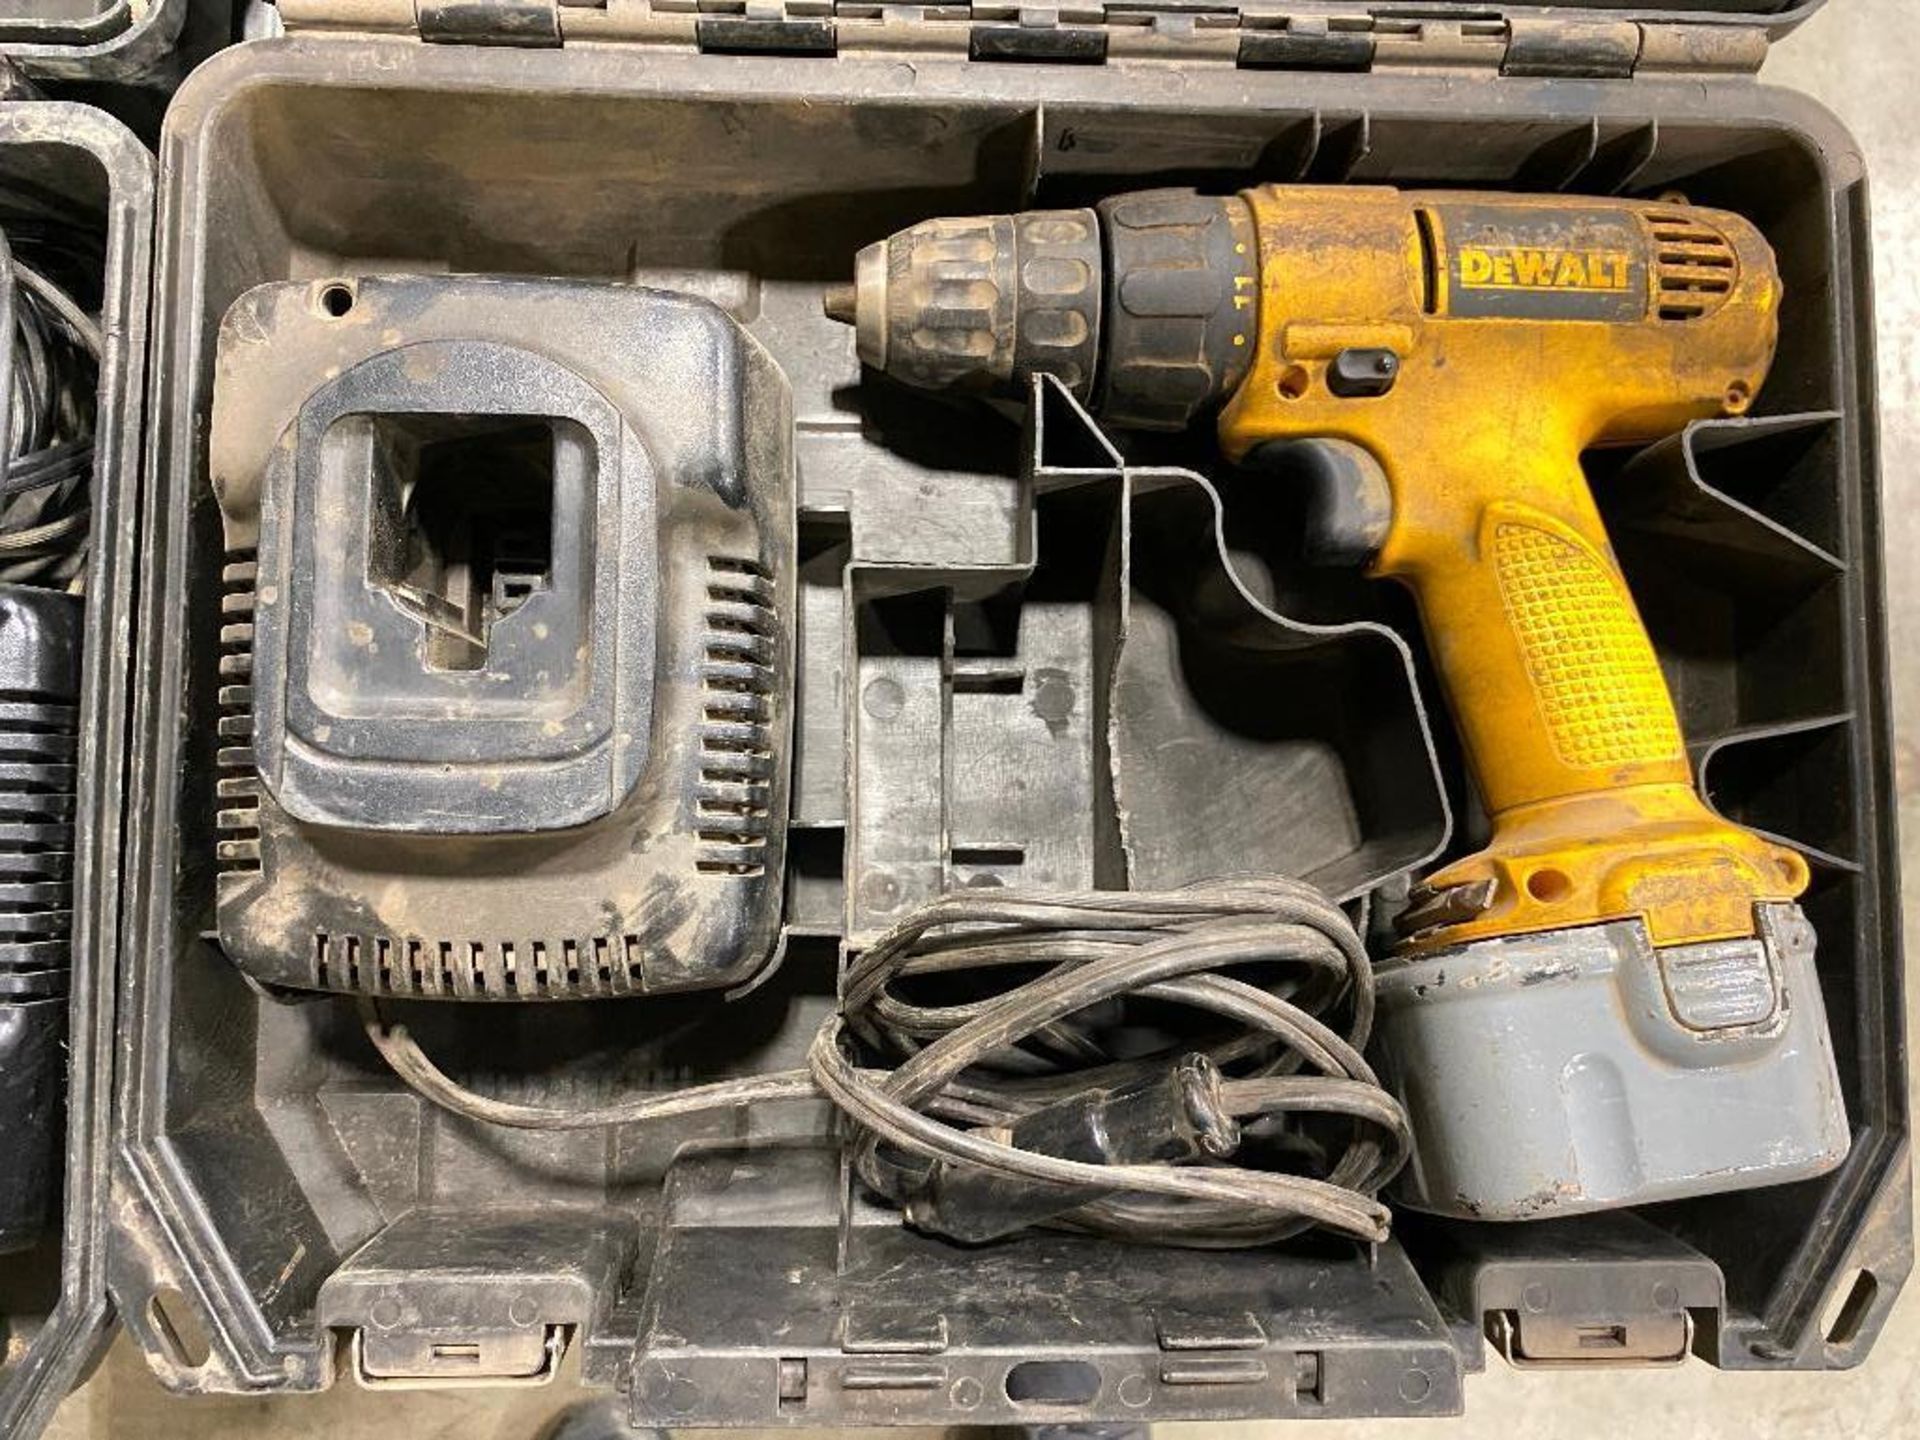 DeWalt Cordless Drill w/ Charger - Image 3 of 6